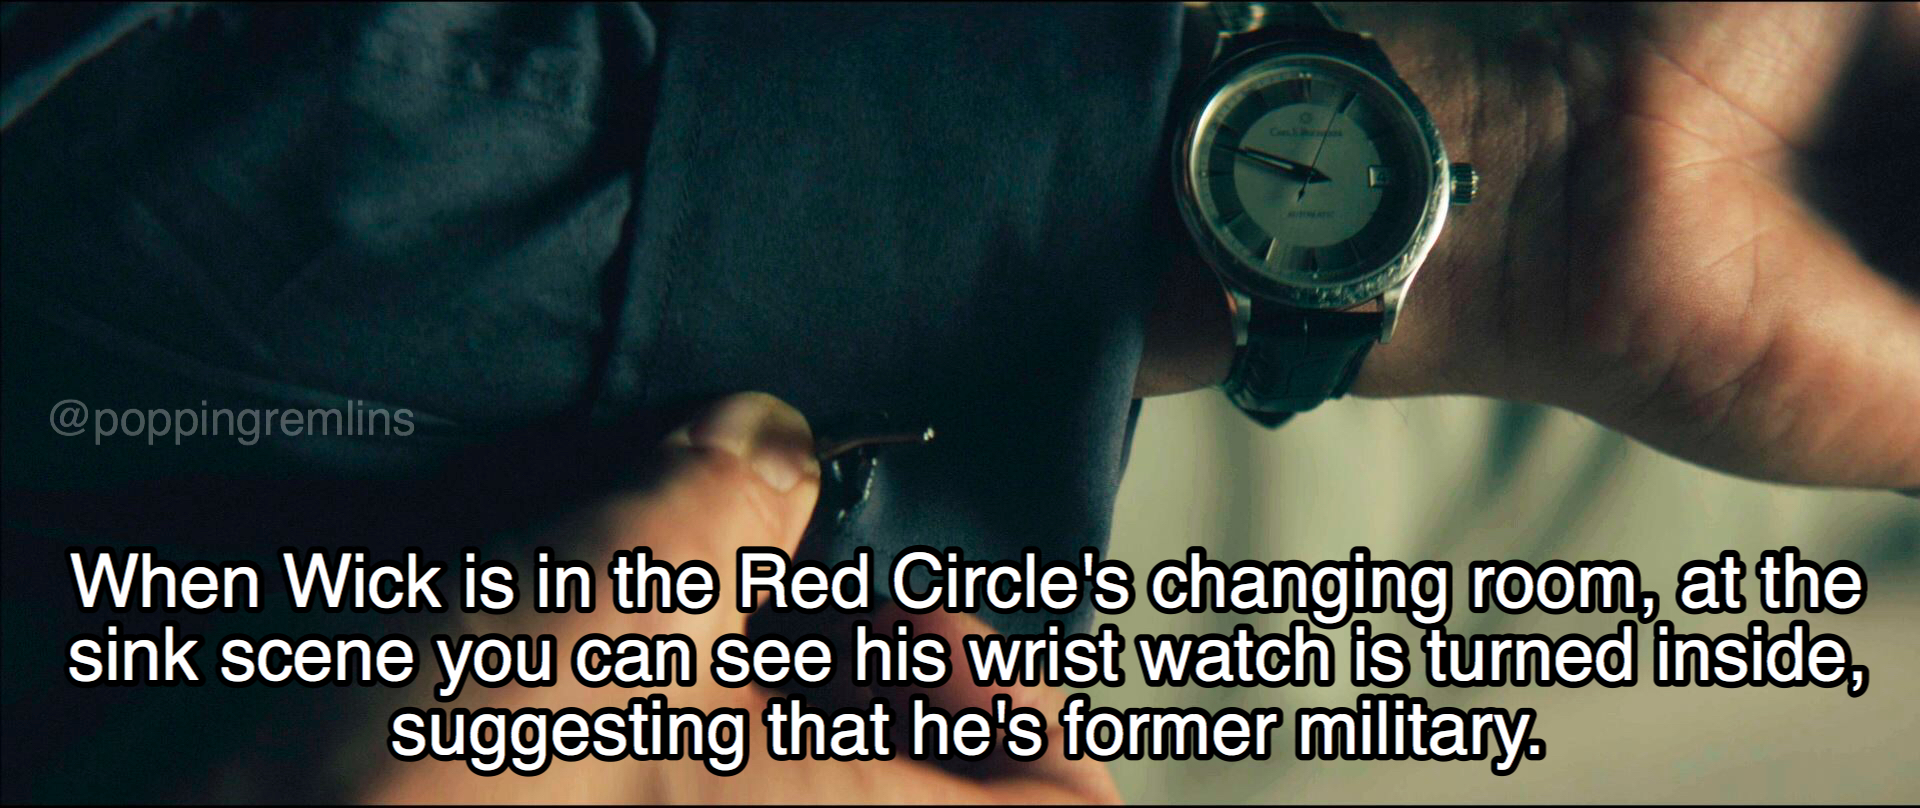 arm - When Wick is in the Red Circle's changing room, at the sink scene you can see his wrist watch is turned inside, suggesting that he's former military